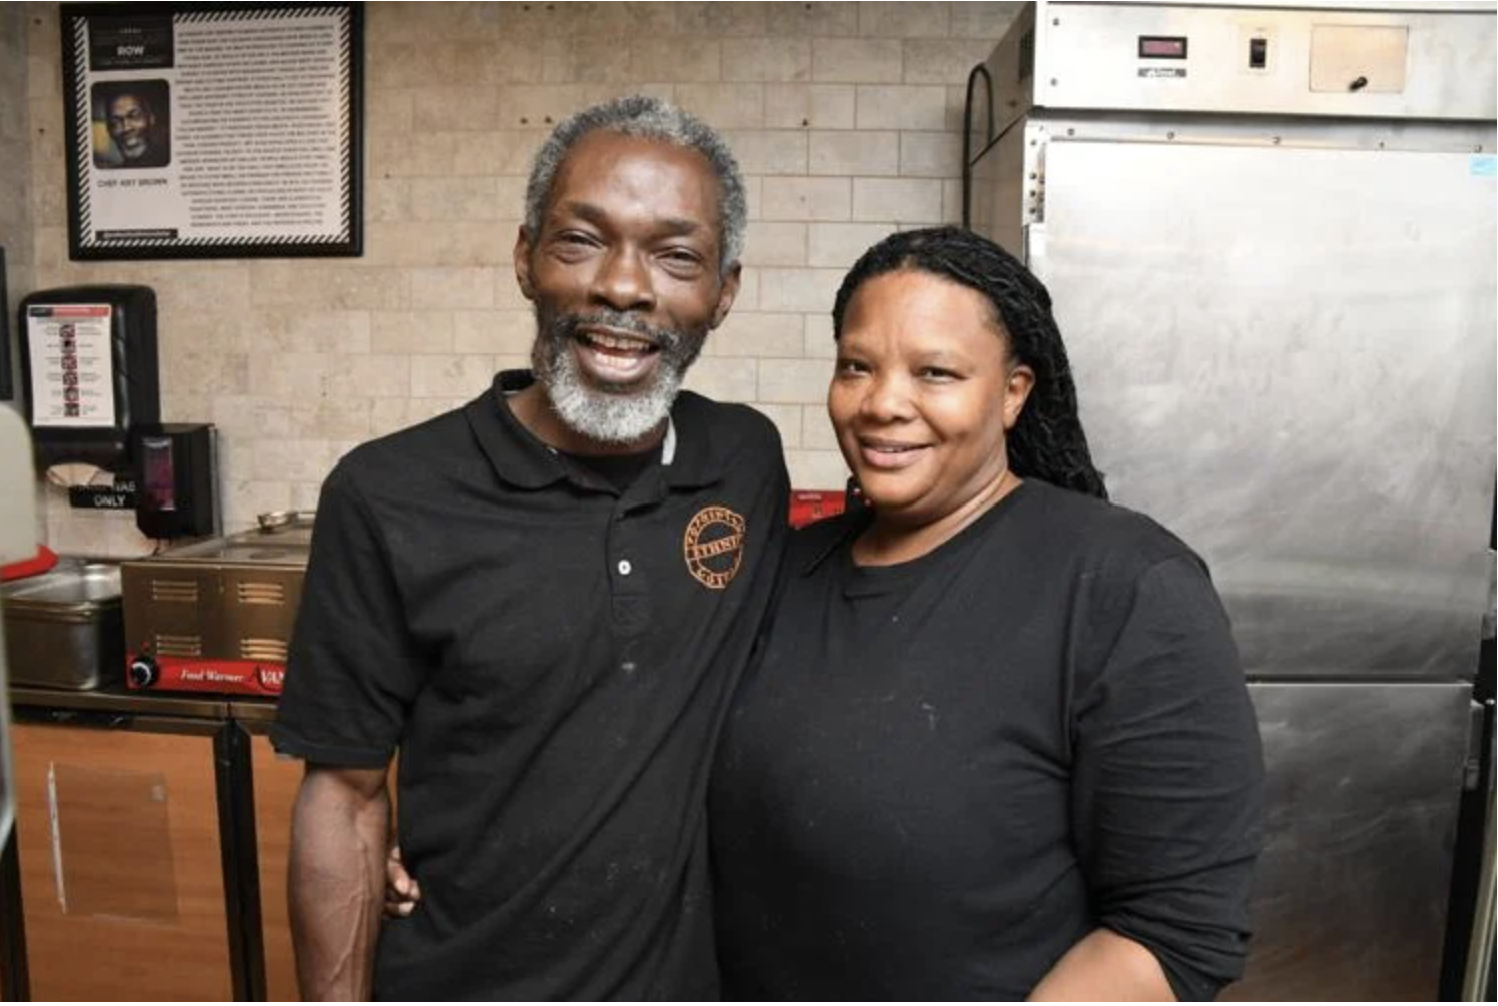 Authentic Ethnic Cuisine owner Arthur Browne with wife Saunsiree Baxter.